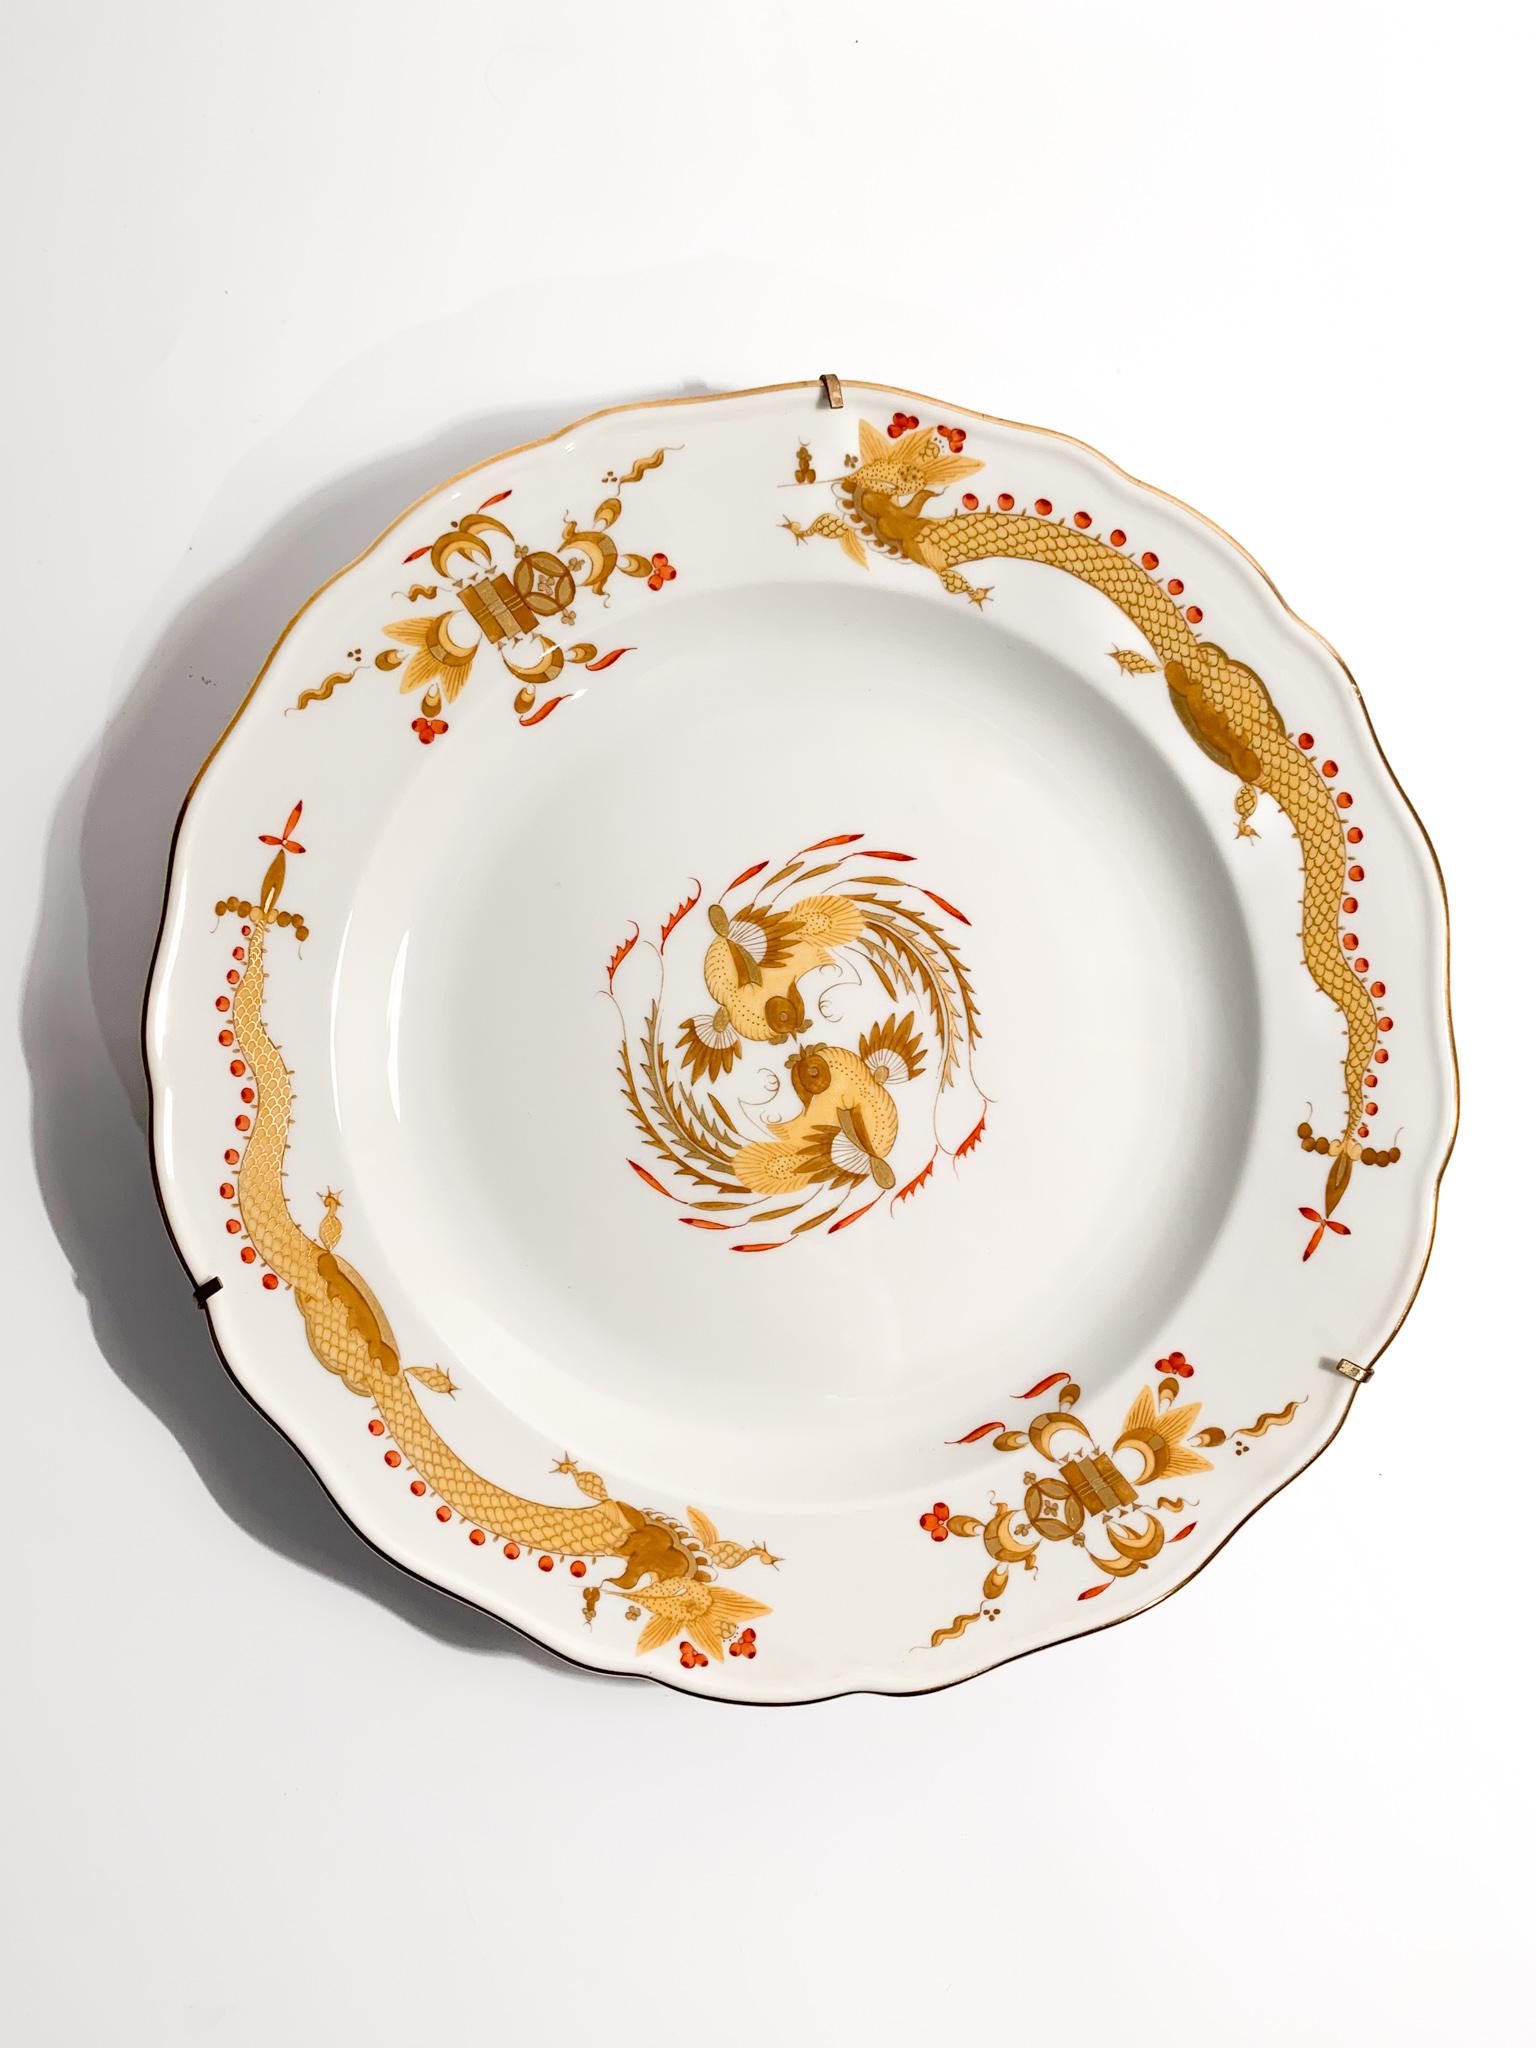 Meissen porcelain plate, Neuer Ausschnitt shape, with gold Court Dragon decoration, mark 1850 - 1925. Structure available for hanging on the wall. 

Ø cm 25

Meissen Porcelain was one of the first European examples of porcelain production, due to